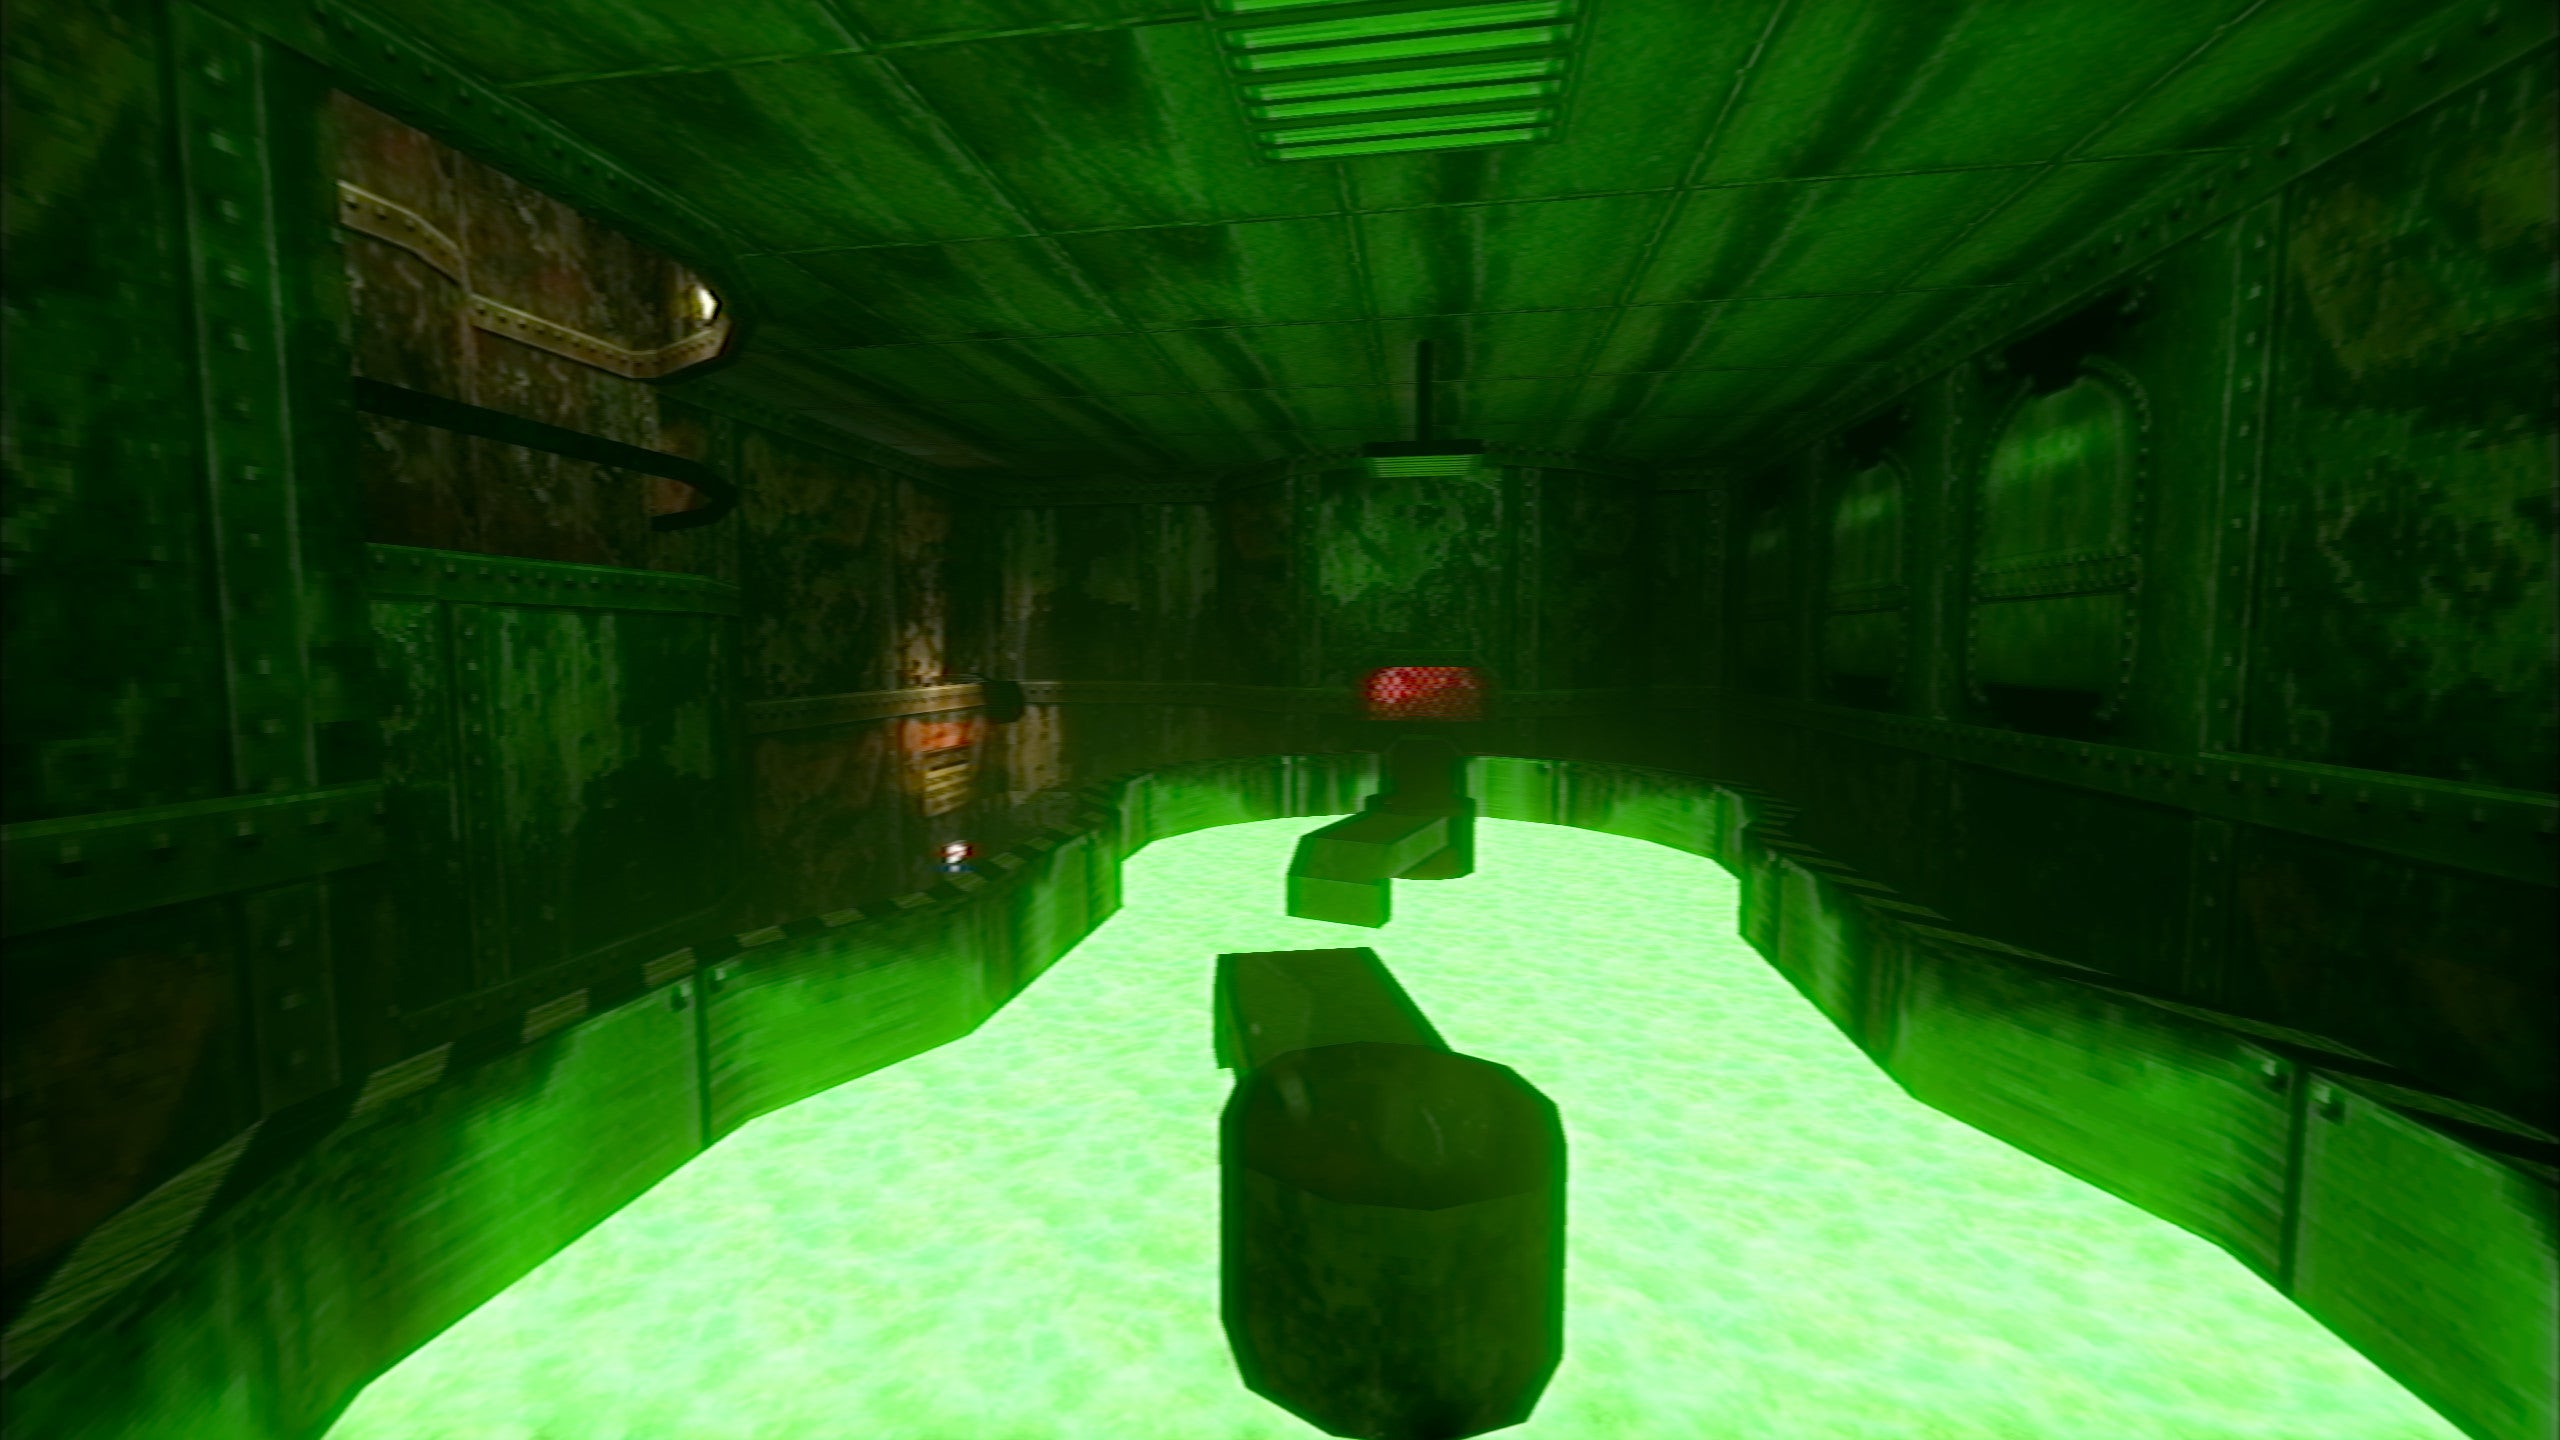 A vat of industrial waste in a Half-Life: Ray Traced screenshot.